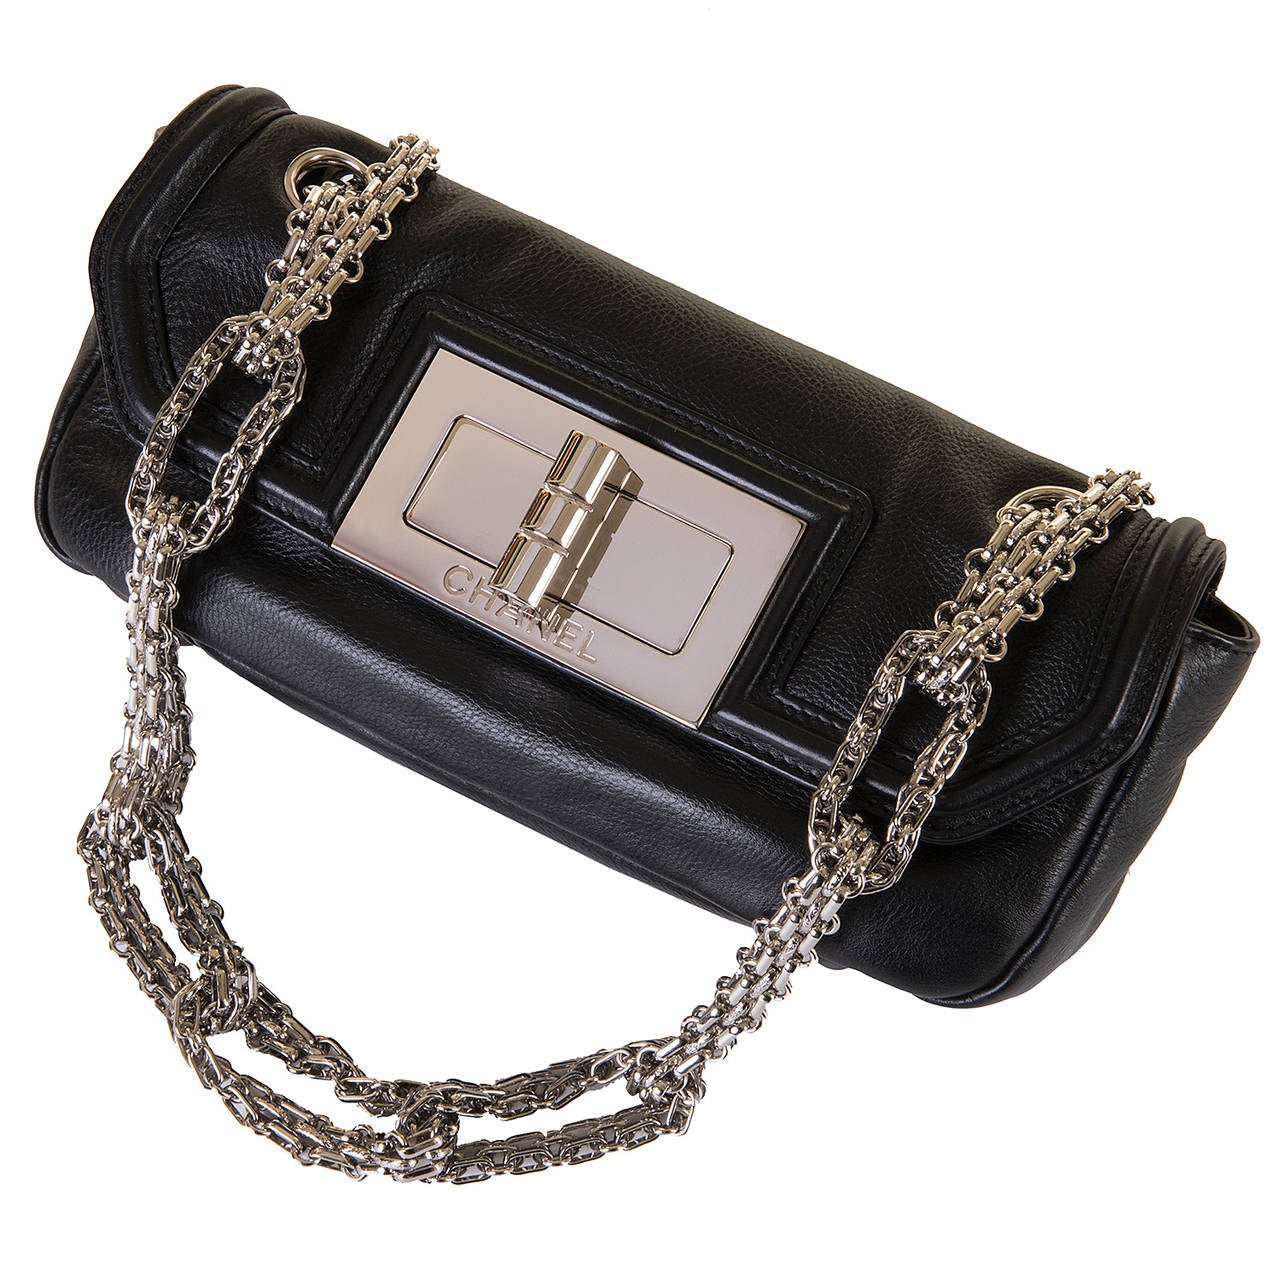 'TRES CHIC' Chanel  Black 'Sac Baguette' with Silver Palladium Hardware 1